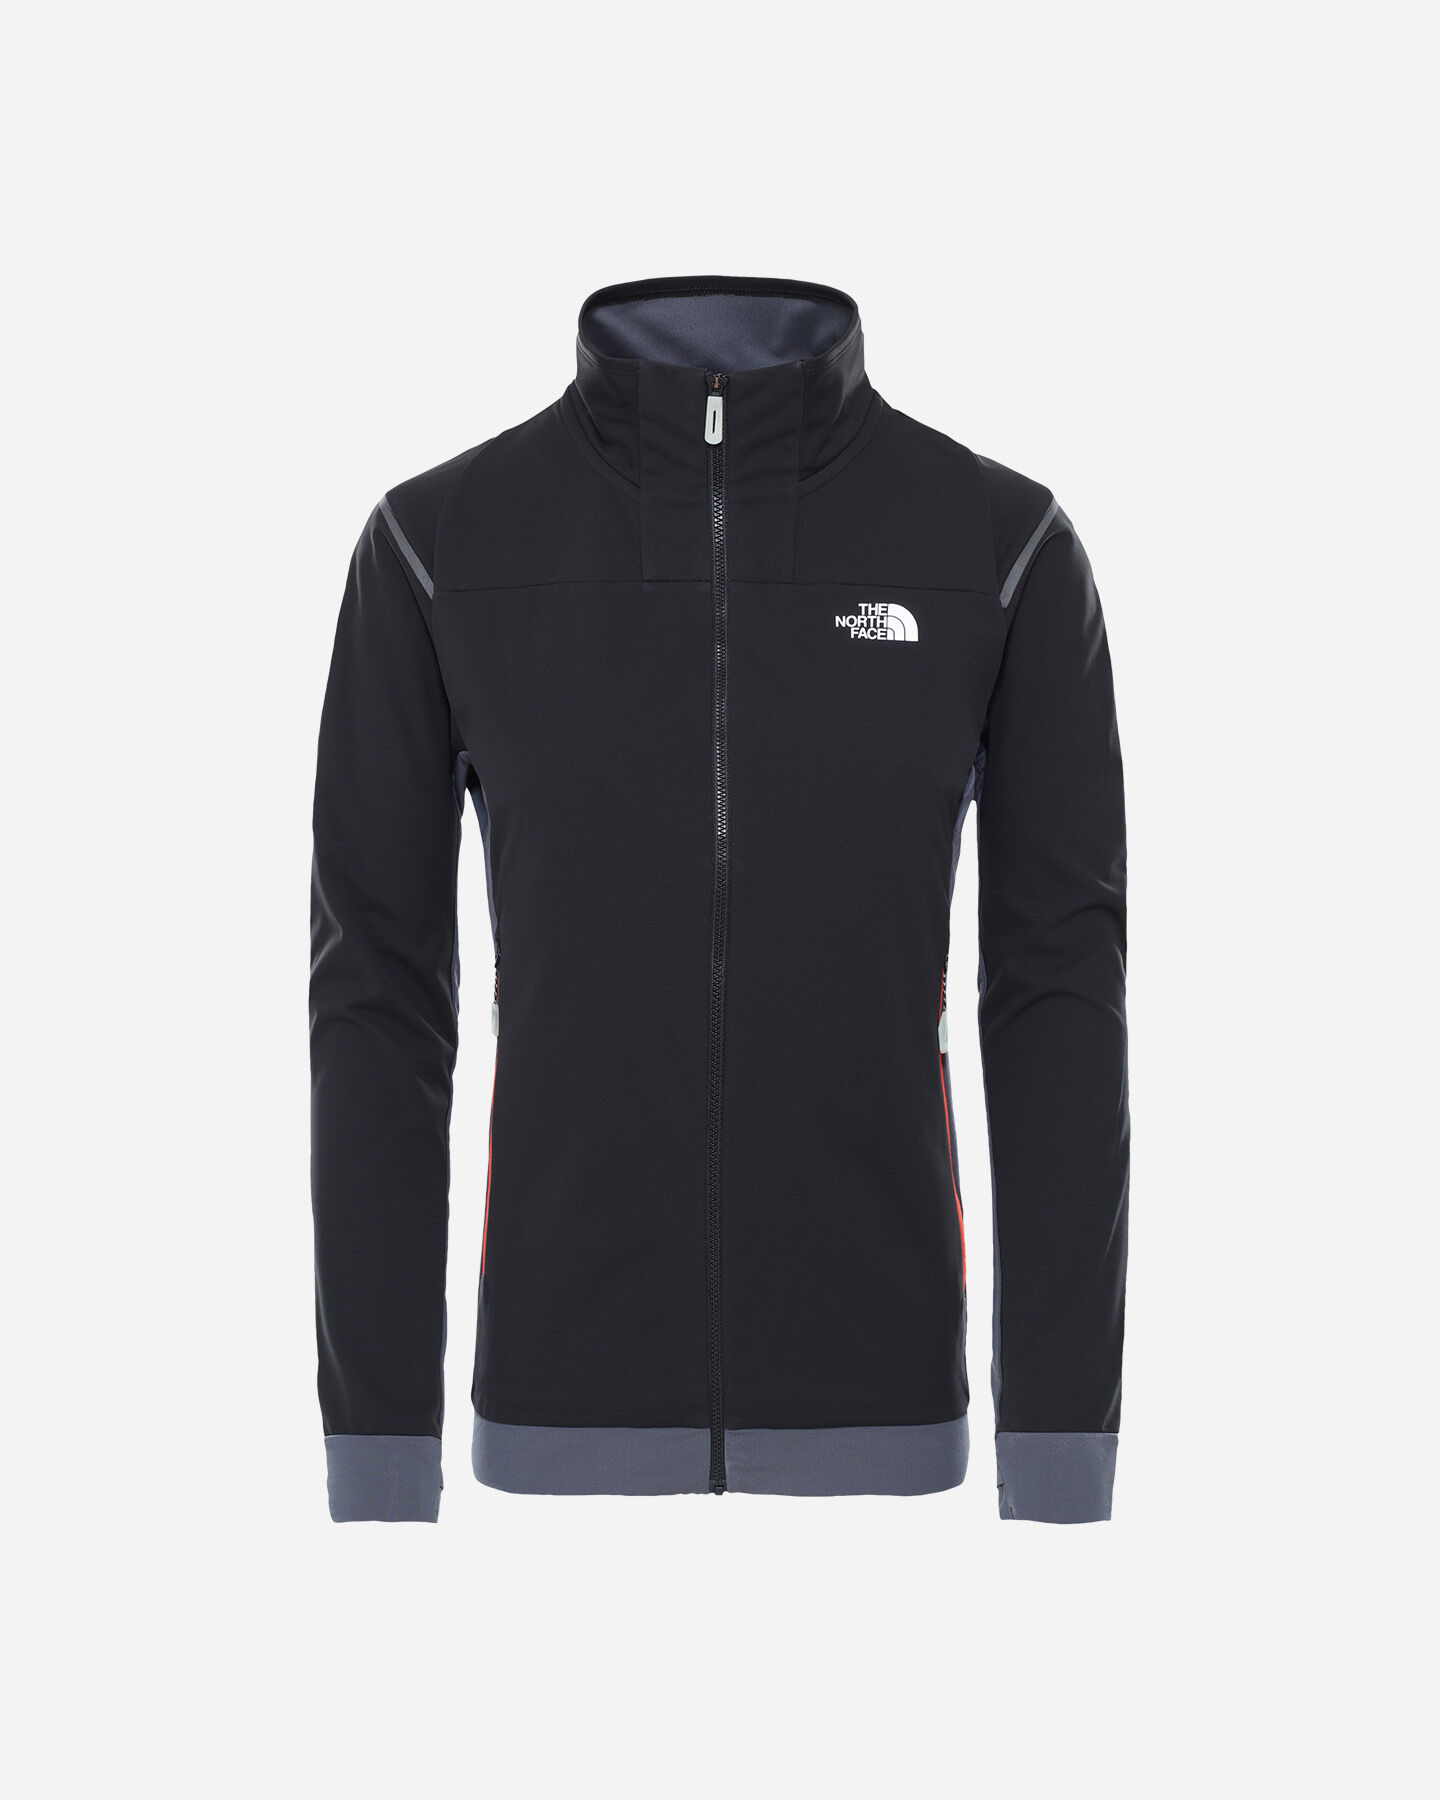  Pile THE NORTH FACE SPEEDTOUR STRETCH W S5243531|NY7|XS scatto 0